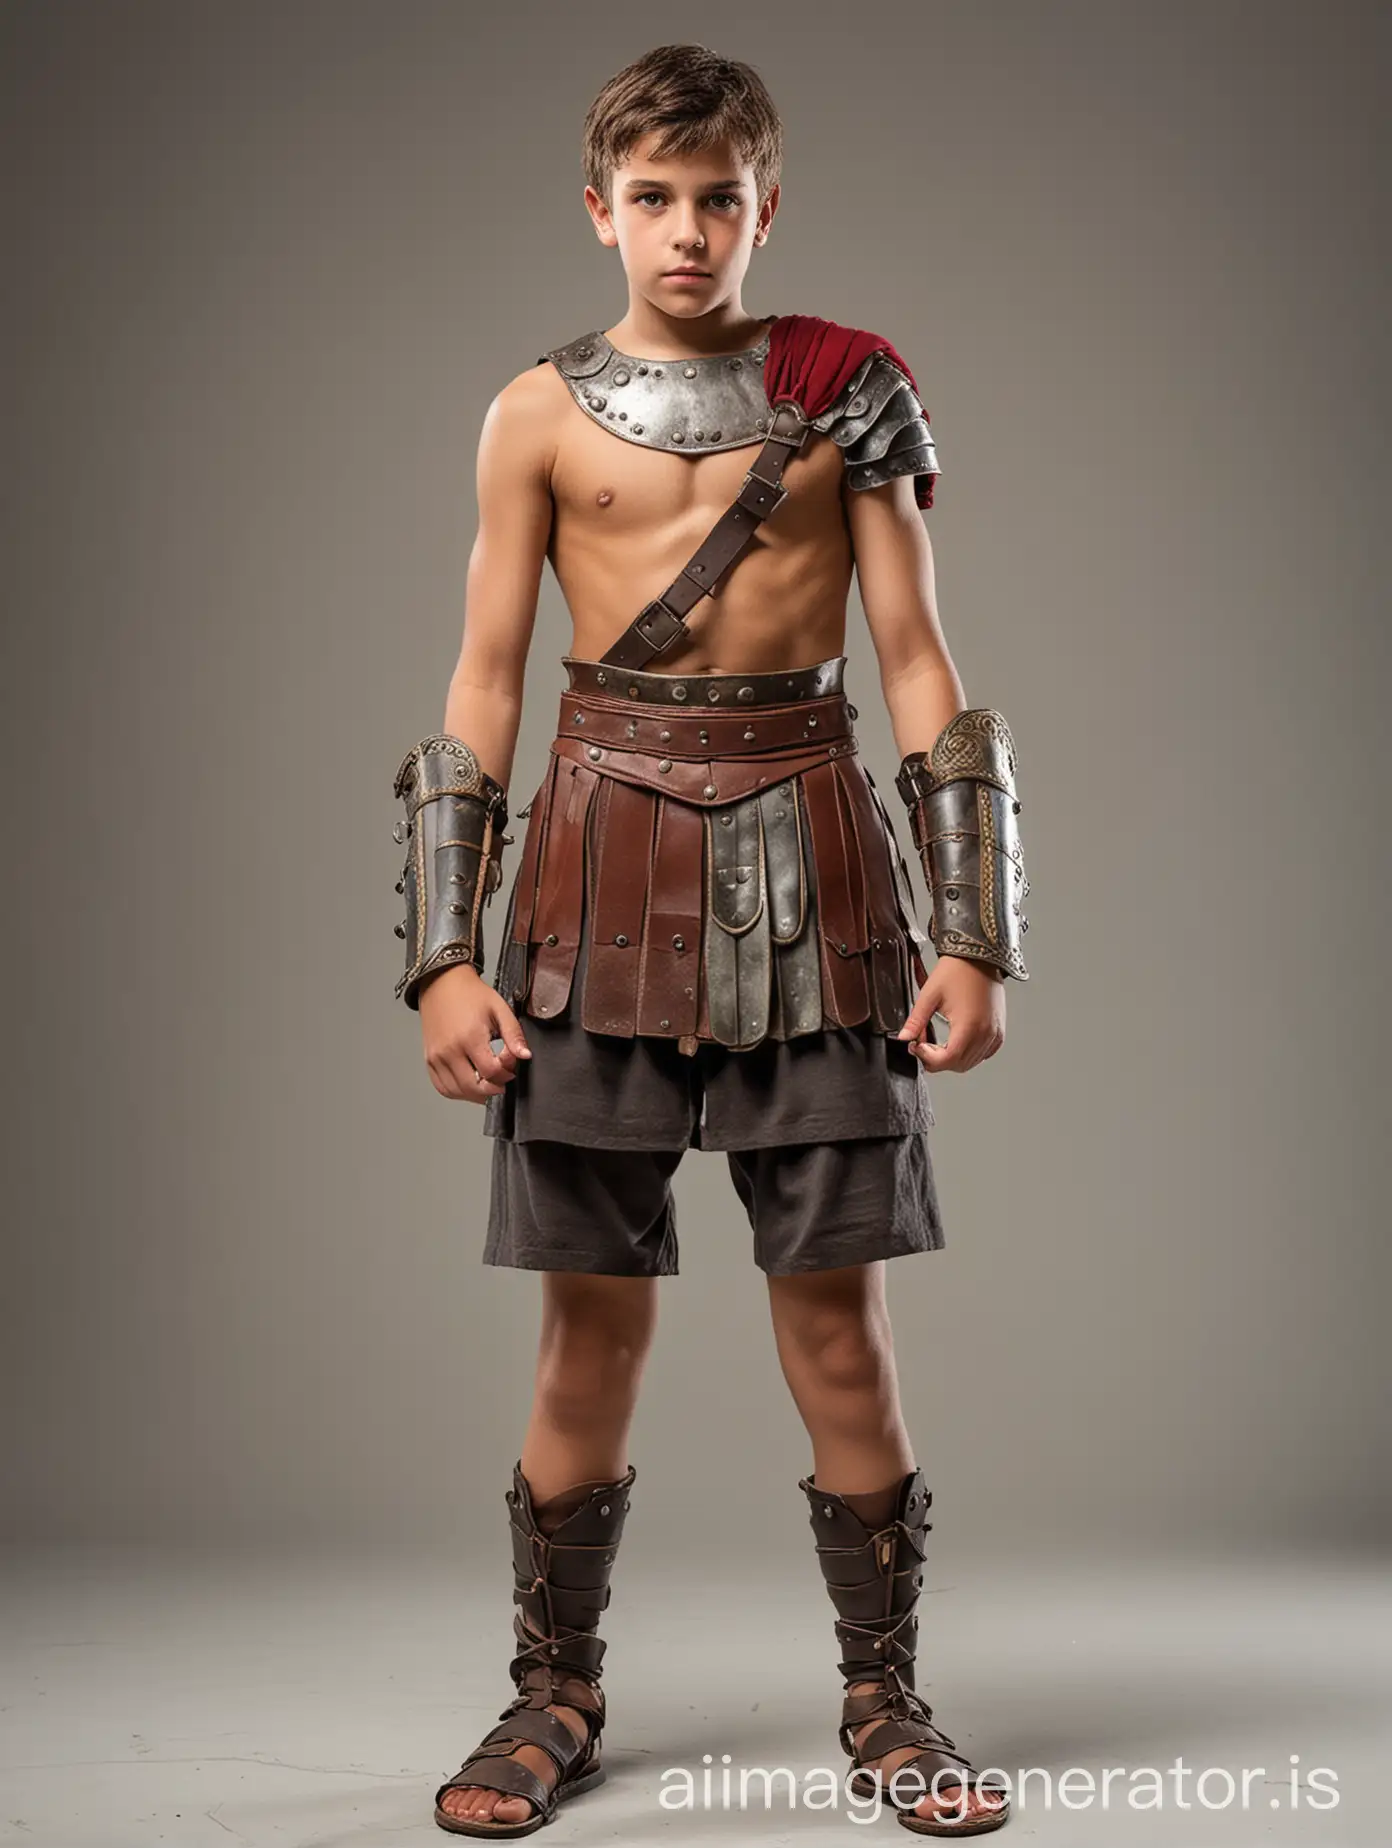 roman gladiator teen boy, full body pose, standing straight looking forward towards camera, hands at sides